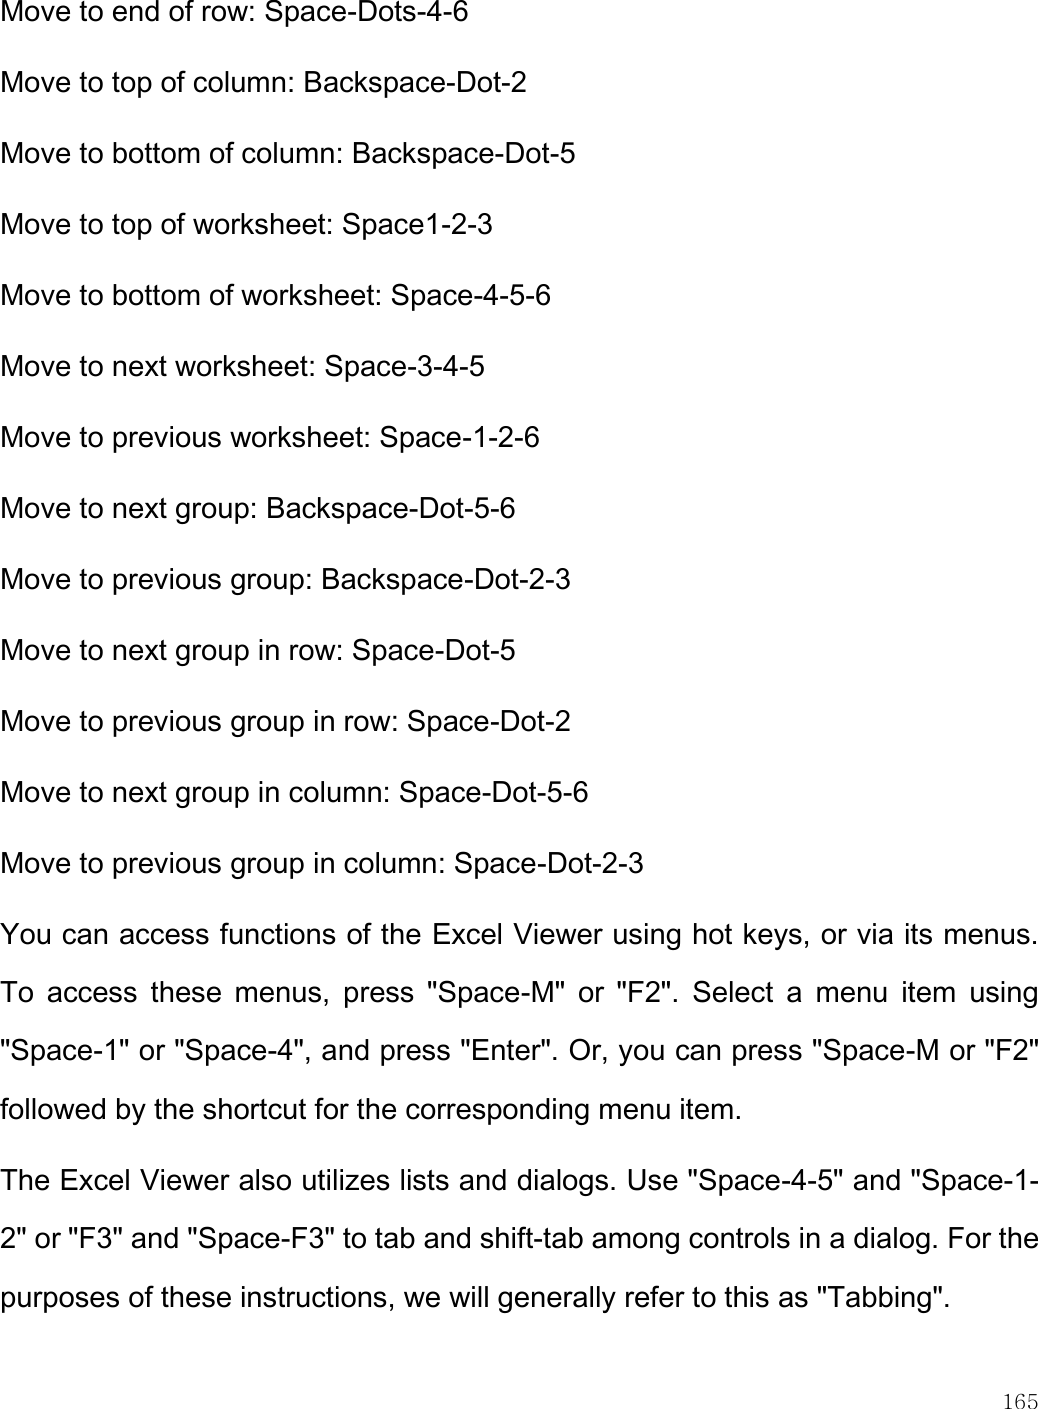    165  Move to end of row: Space-Dots-4-6  Move to top of column: Backspace-Dot-2  Move to bottom of column: Backspace-Dot-5  Move to top of worksheet: Space1-2-3  Move to bottom of worksheet: Space-4-5-6  Move to next worksheet: Space-3-4-5  Move to previous worksheet: Space-1-2-6  Move to next group: Backspace-Dot-5-6  Move to previous group: Backspace-Dot-2-3  Move to next group in row: Space-Dot-5  Move to previous group in row: Space-Dot-2  Move to next group in column: Space-Dot-5-6  Move to previous group in column: Space-Dot-2-3  You can access functions of the Excel Viewer using hot keys, or via its menus. To  access  these  menus,  press  &quot;Space-M&quot;  or  &quot;F2&quot;.  Select  a  menu  item  using &quot;Space-1&quot; or &quot;Space-4&quot;, and press &quot;Enter&quot;. Or, you can press &quot;Space-M or &quot;F2&quot; followed by the shortcut for the corresponding menu item.  The Excel Viewer also utilizes lists and dialogs. Use &quot;Space-4-5&quot; and &quot;Space-1-2&quot; or &quot;F3&quot; and &quot;Space-F3&quot; to tab and shift-tab among controls in a dialog. For the purposes of these instructions, we will generally refer to this as &quot;Tabbing&quot;.  